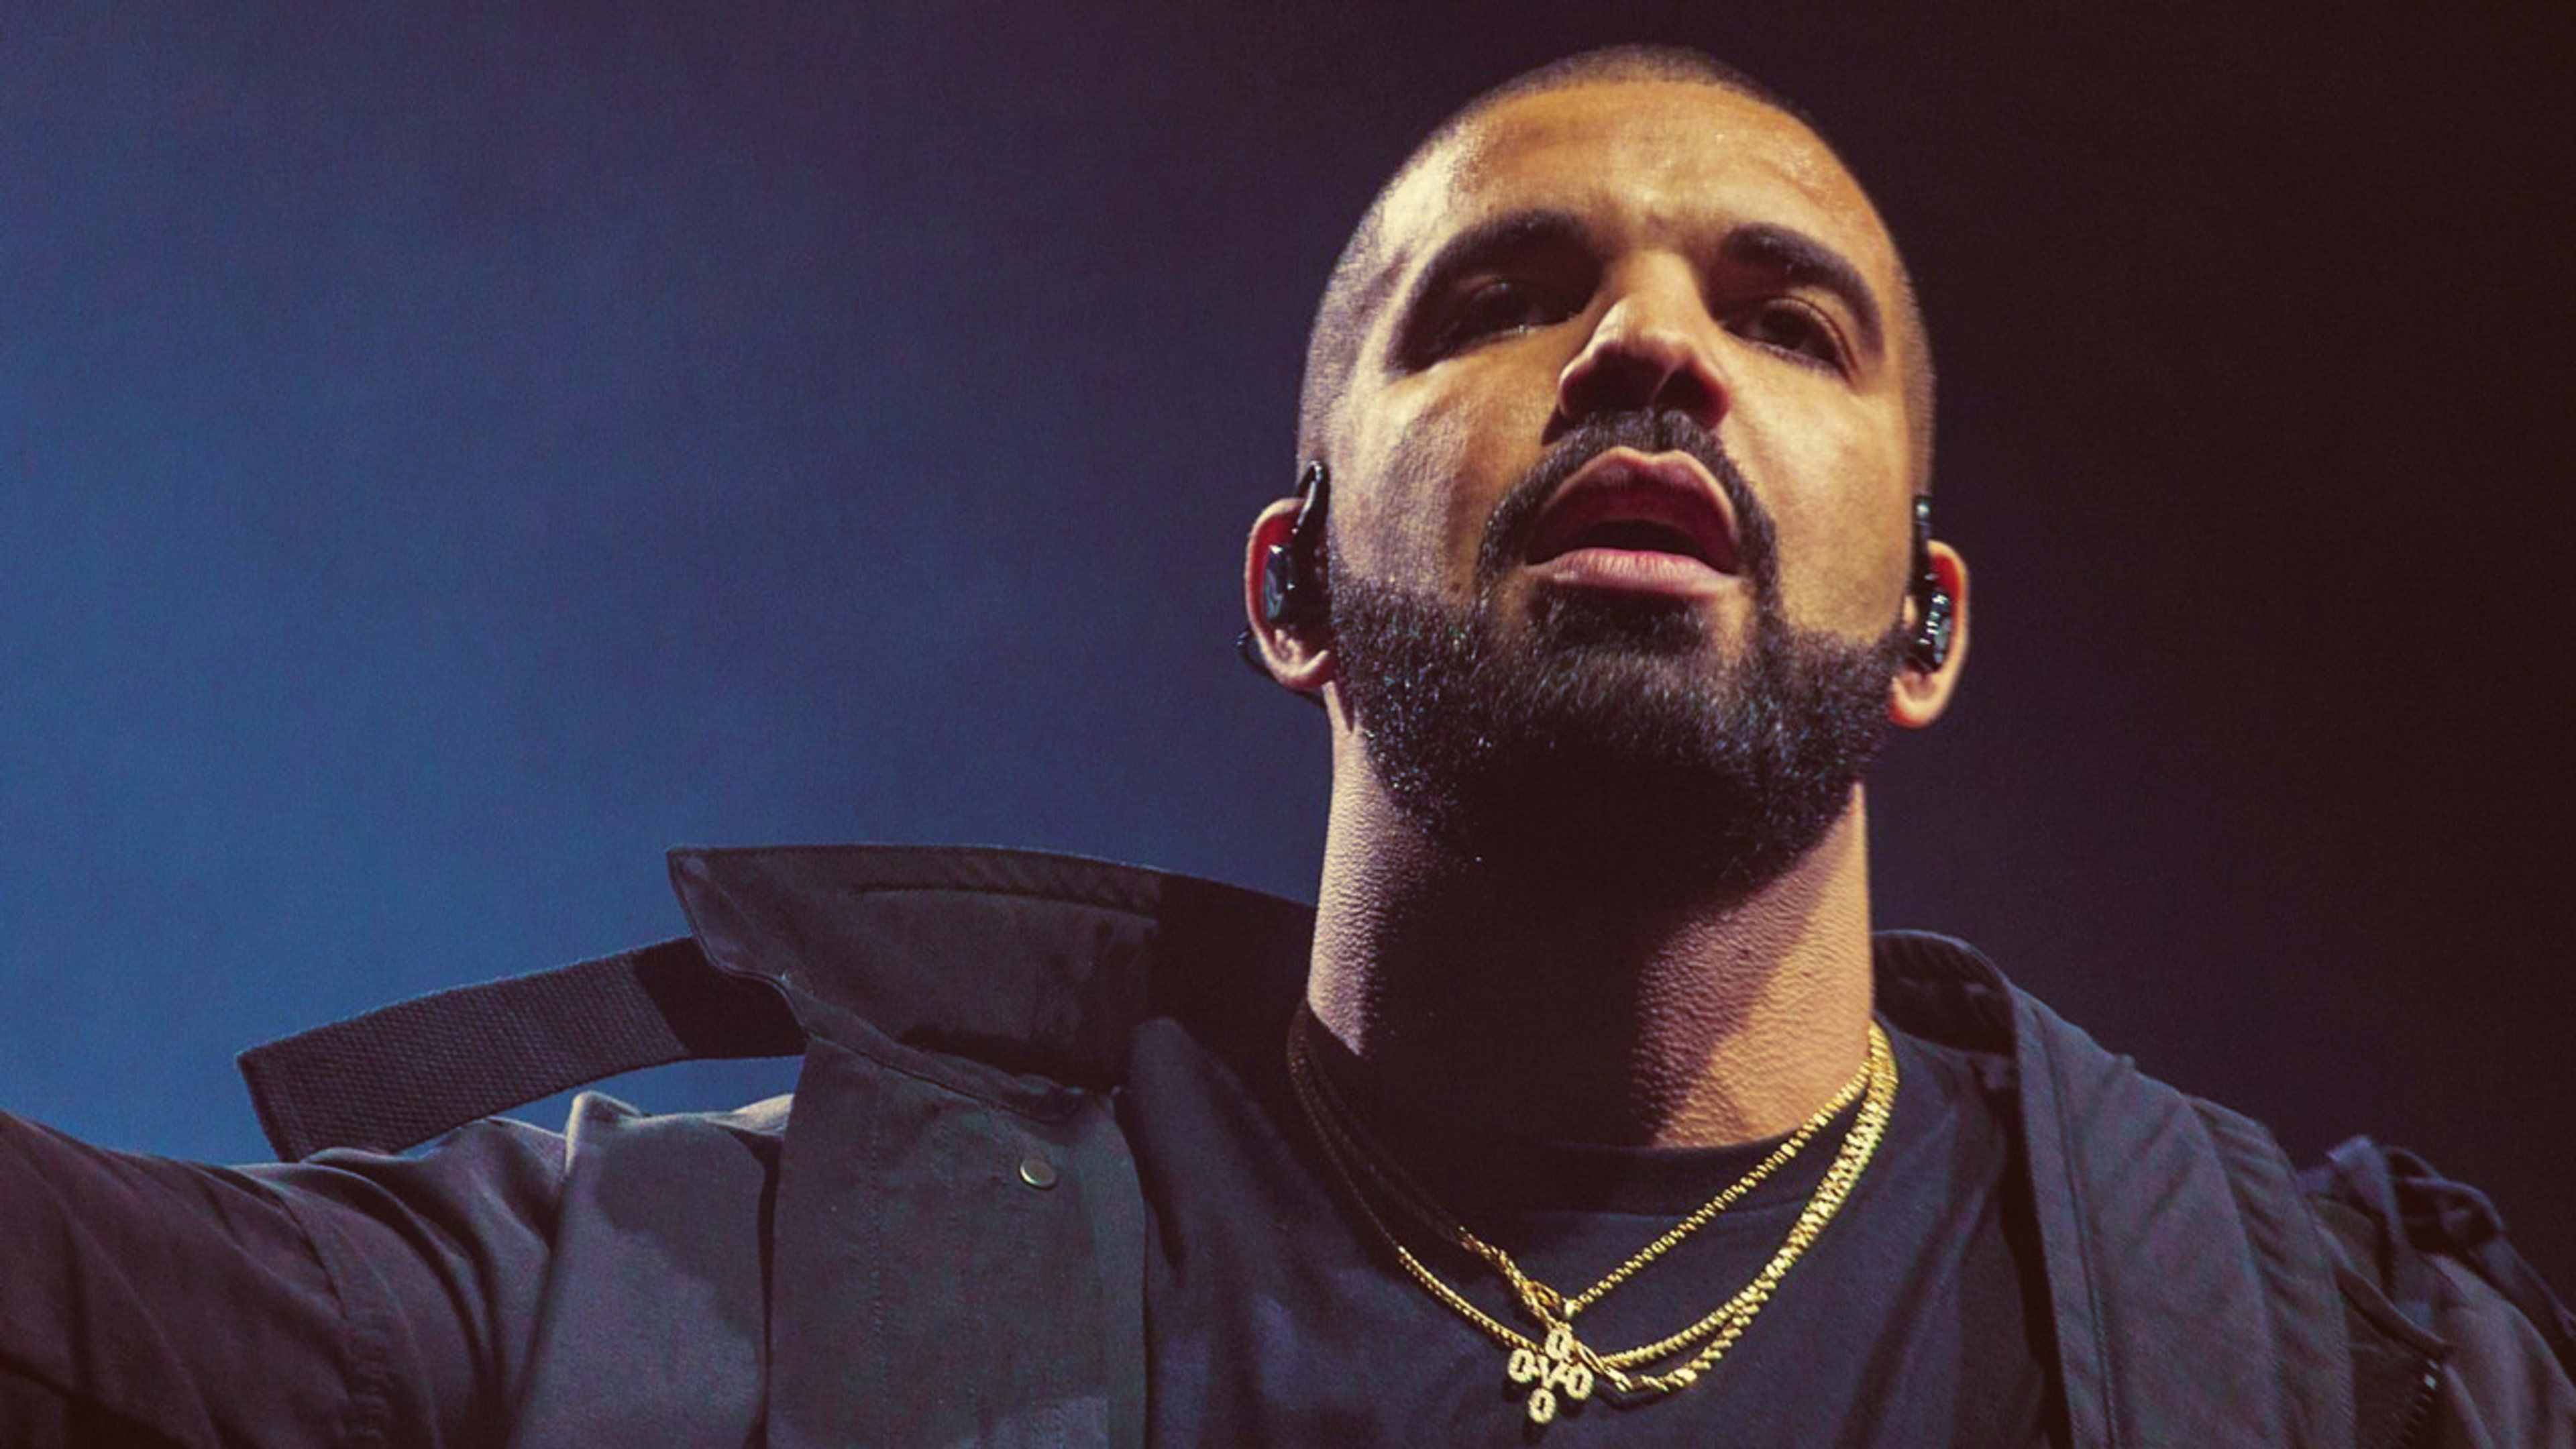 Drake and Live Nation are the newest investors in Ntwrk, the QVC for Gen Z and young millennials